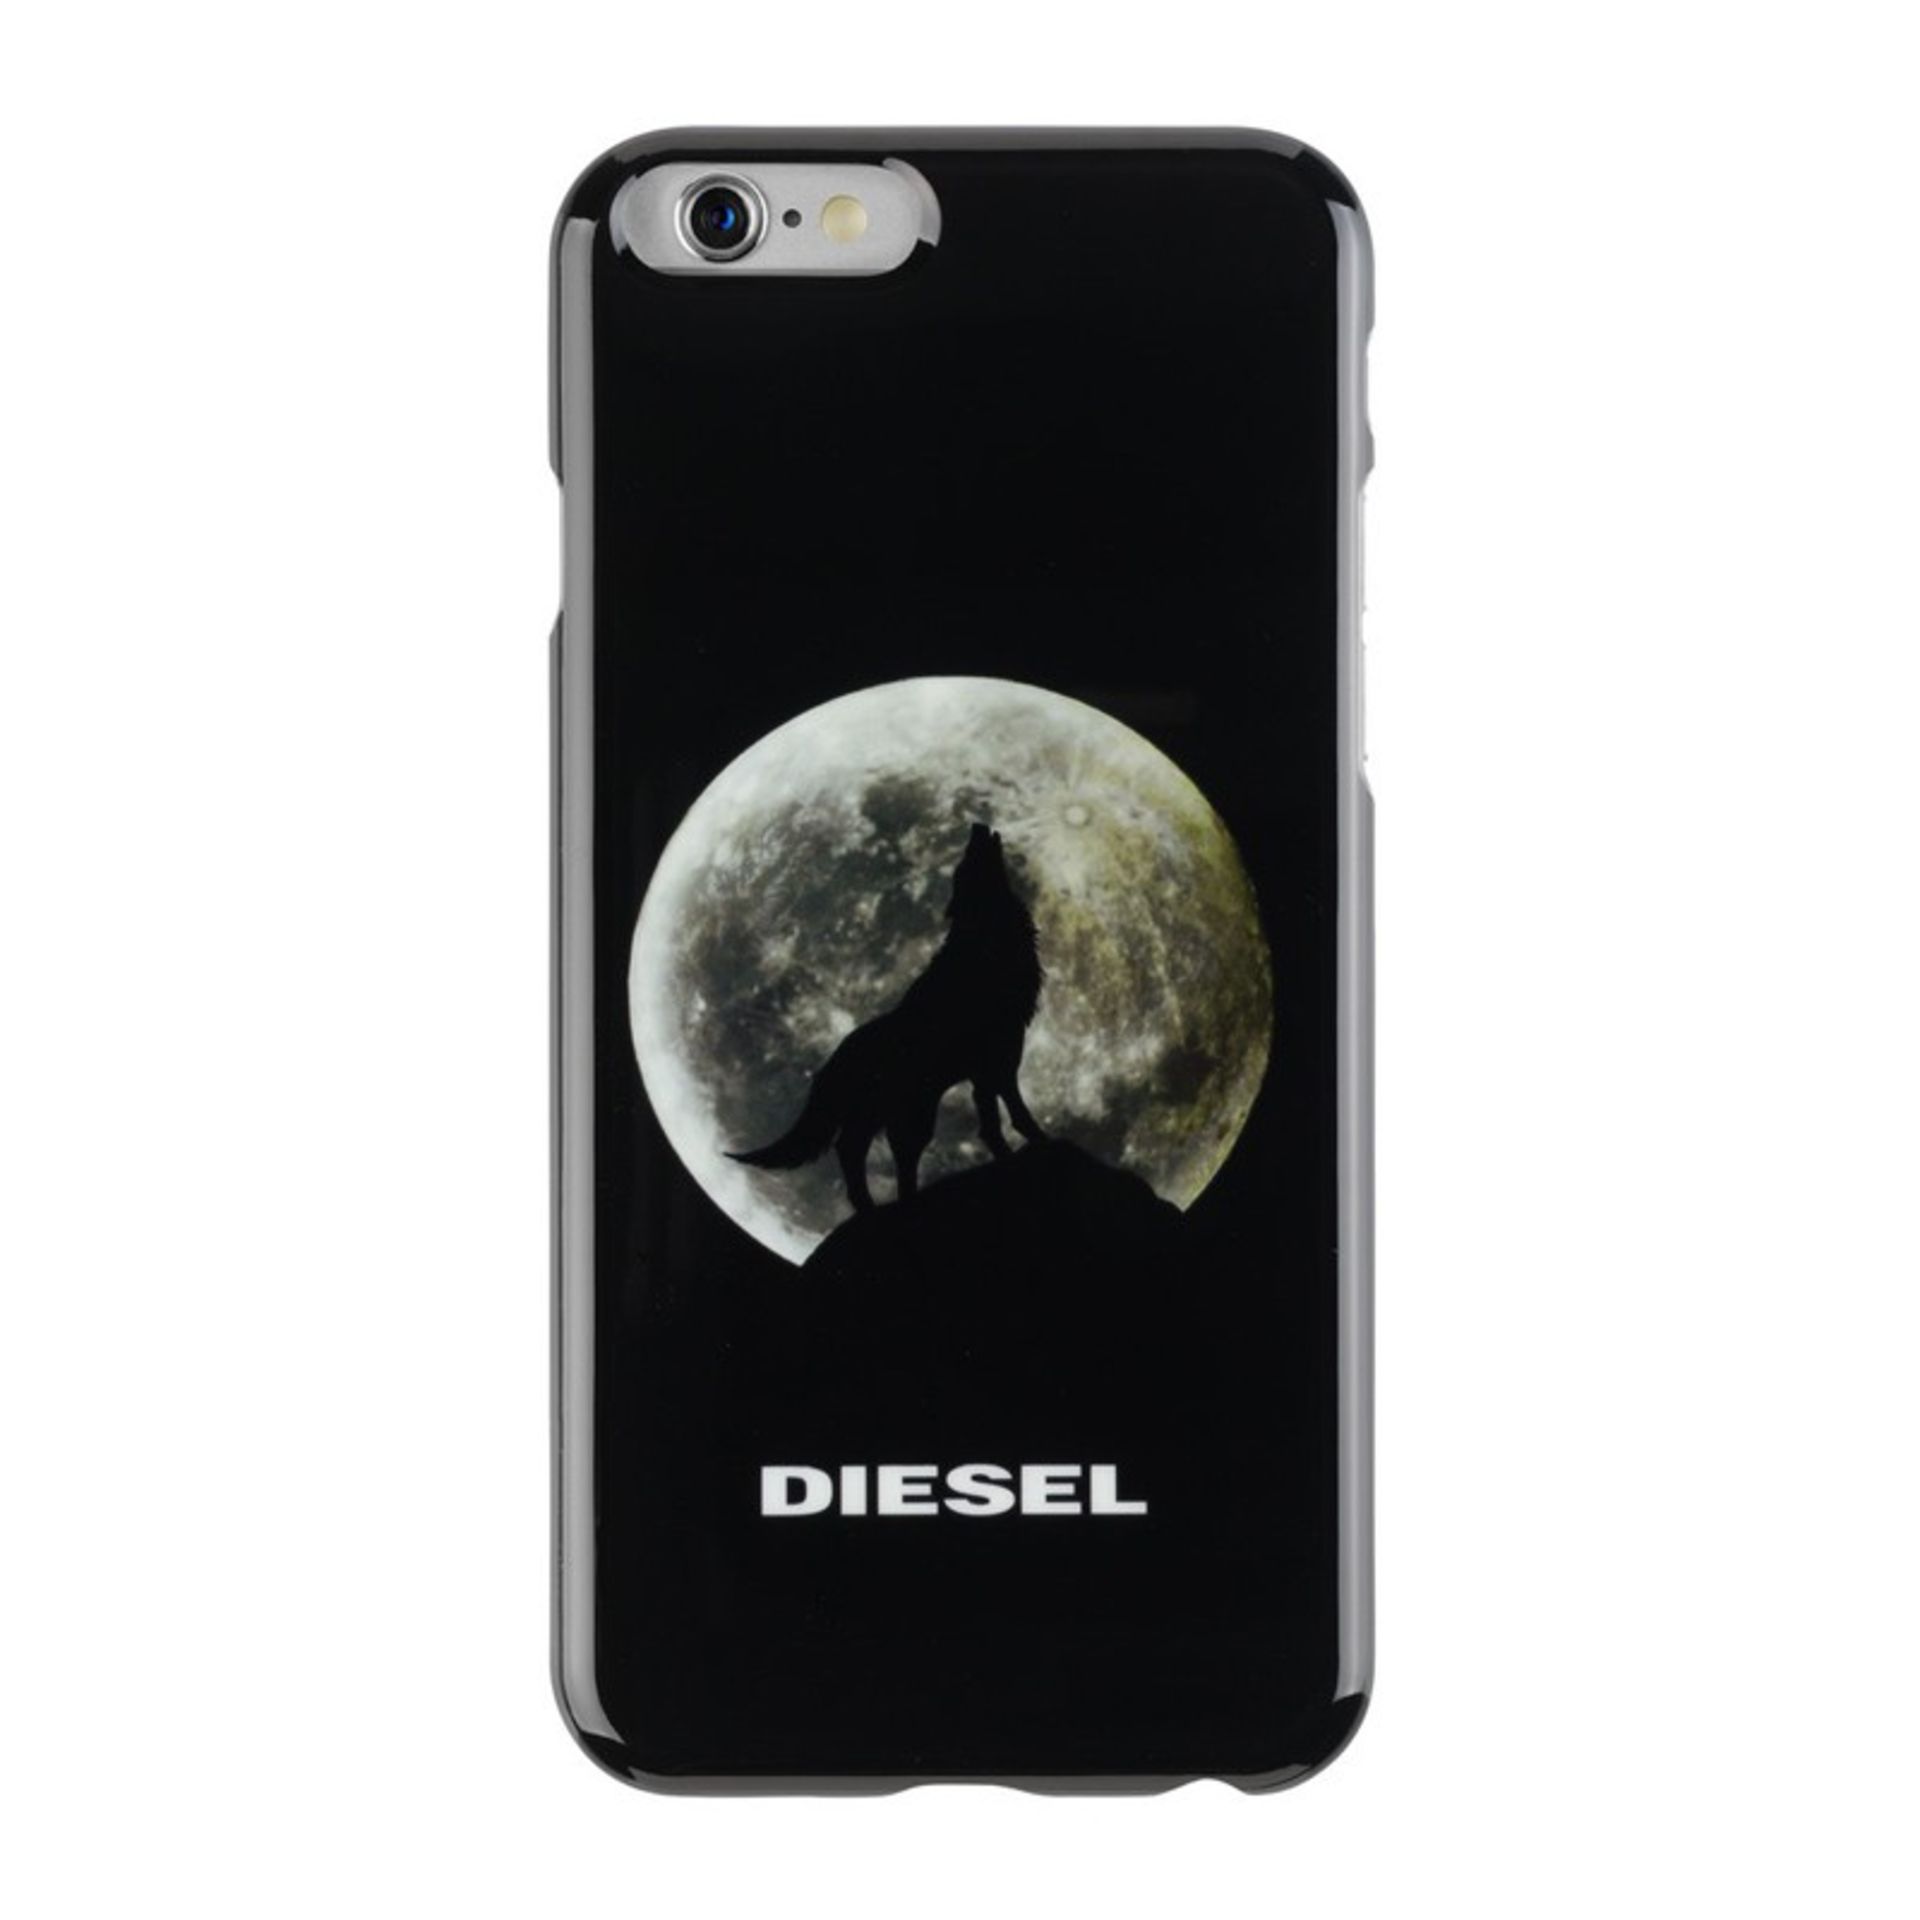 V Brand New Diesel Pluton 6 Hard Snap Case For iPhone 6 ISP Price 19.90 Euros X 2 YOUR BID PRICE